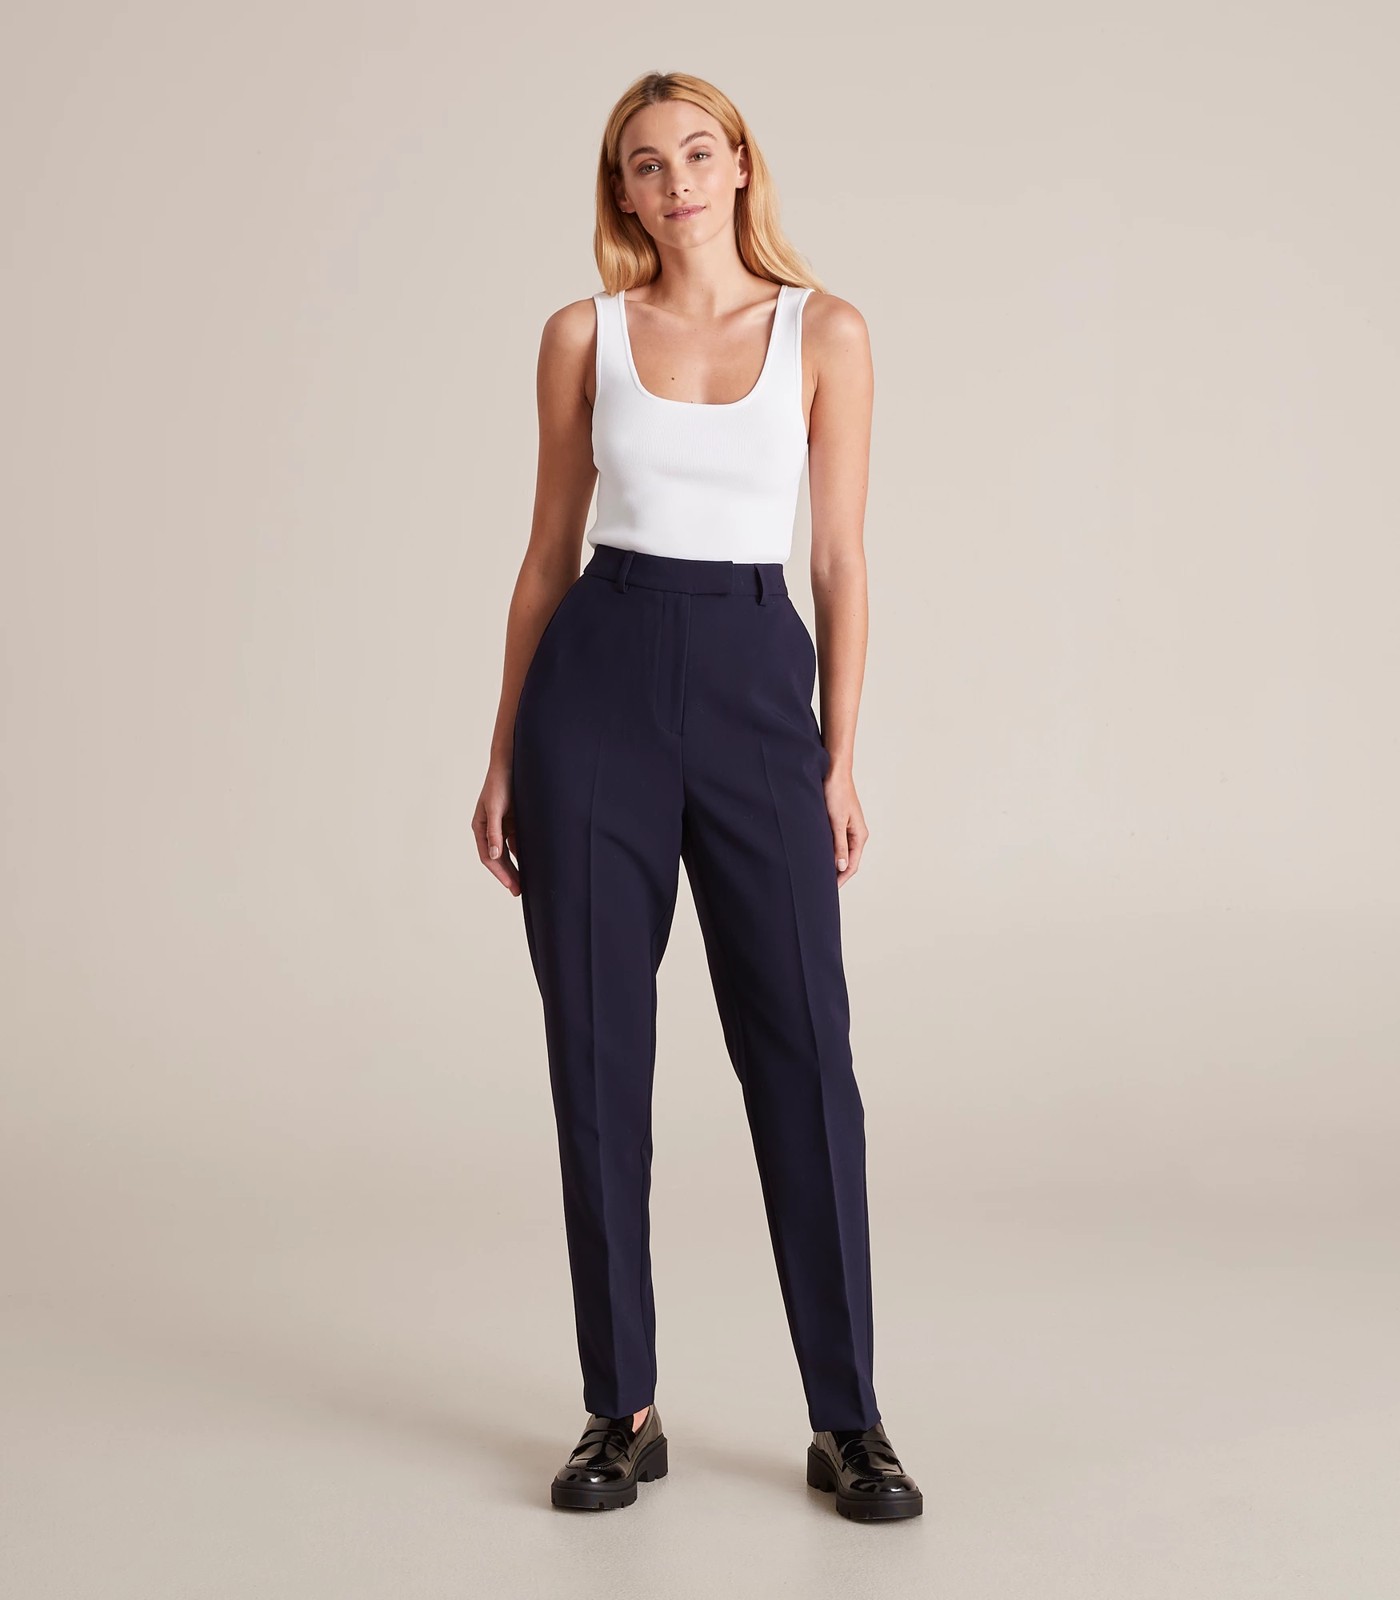 High Waist Tapered Full Length Pants - Preview - French Navy Blue